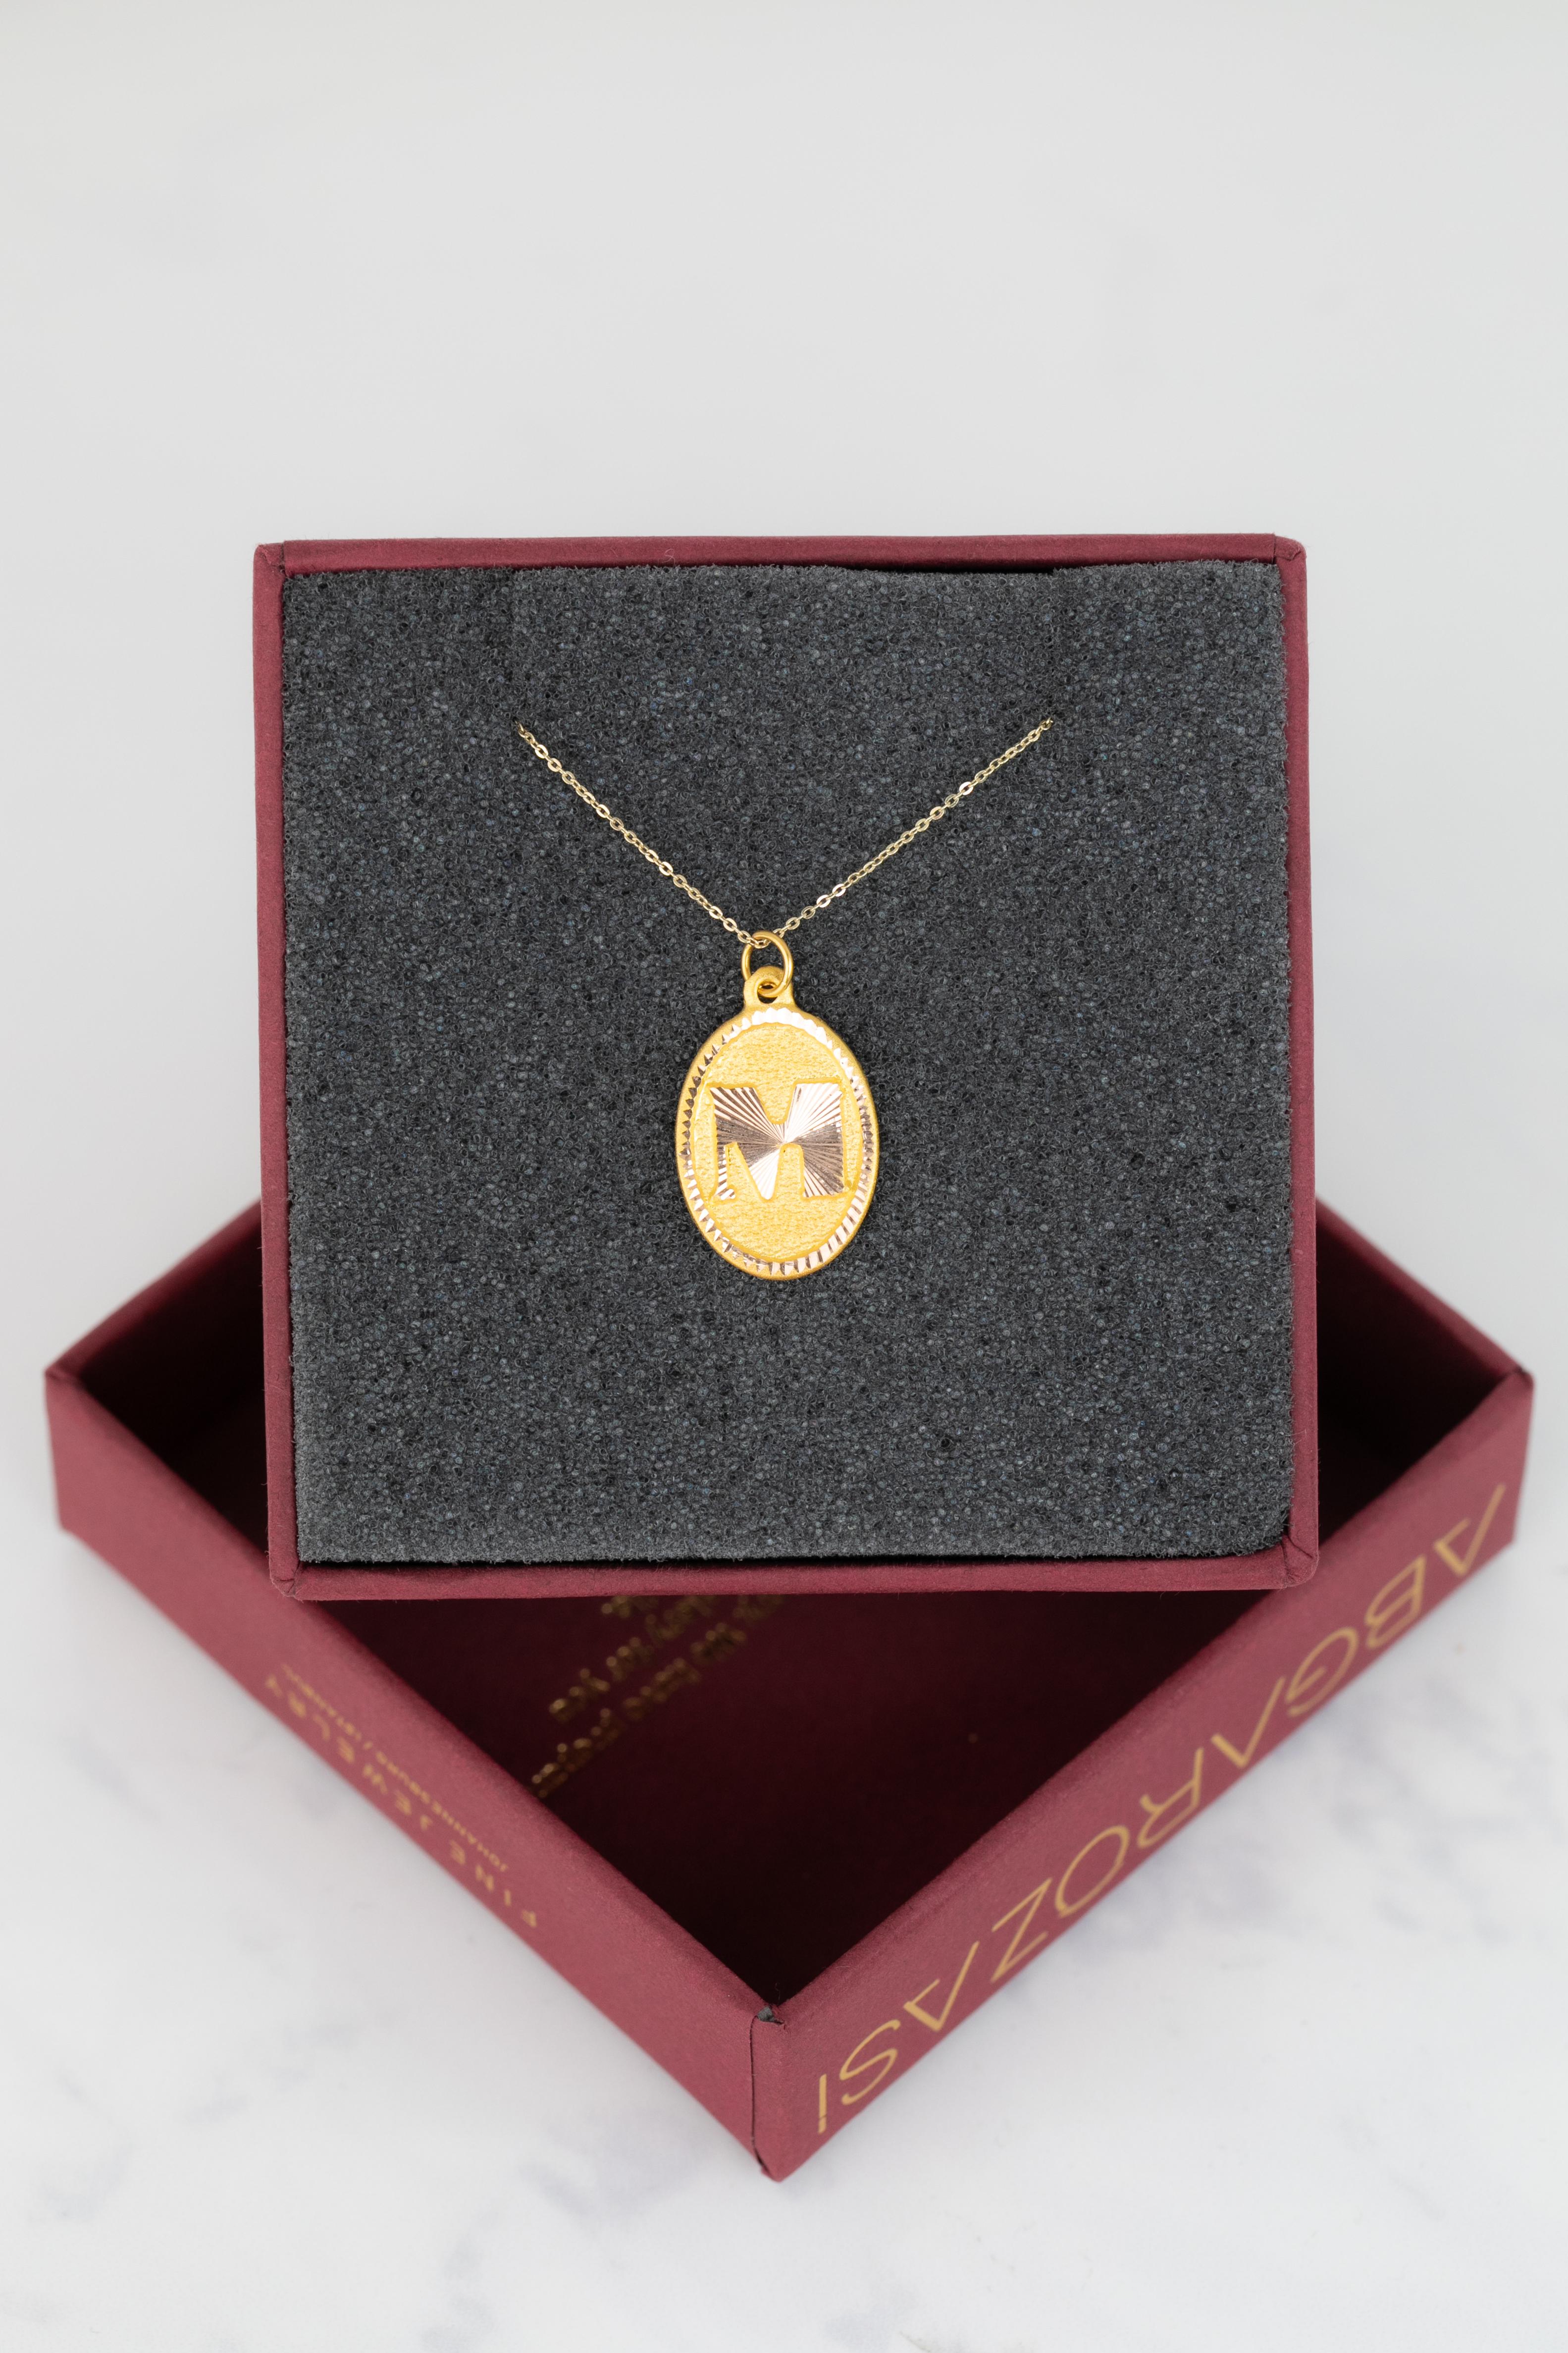 14K Gold Necklaces, Letter Necklace Models, Letter K Gold Necklace-Gift Necklace Models, Daily Necklaces, Letter Jewelry

It's a manual labor product. 'Handmade'. Fashionable product.

This necklace was made with quality materials and excellent